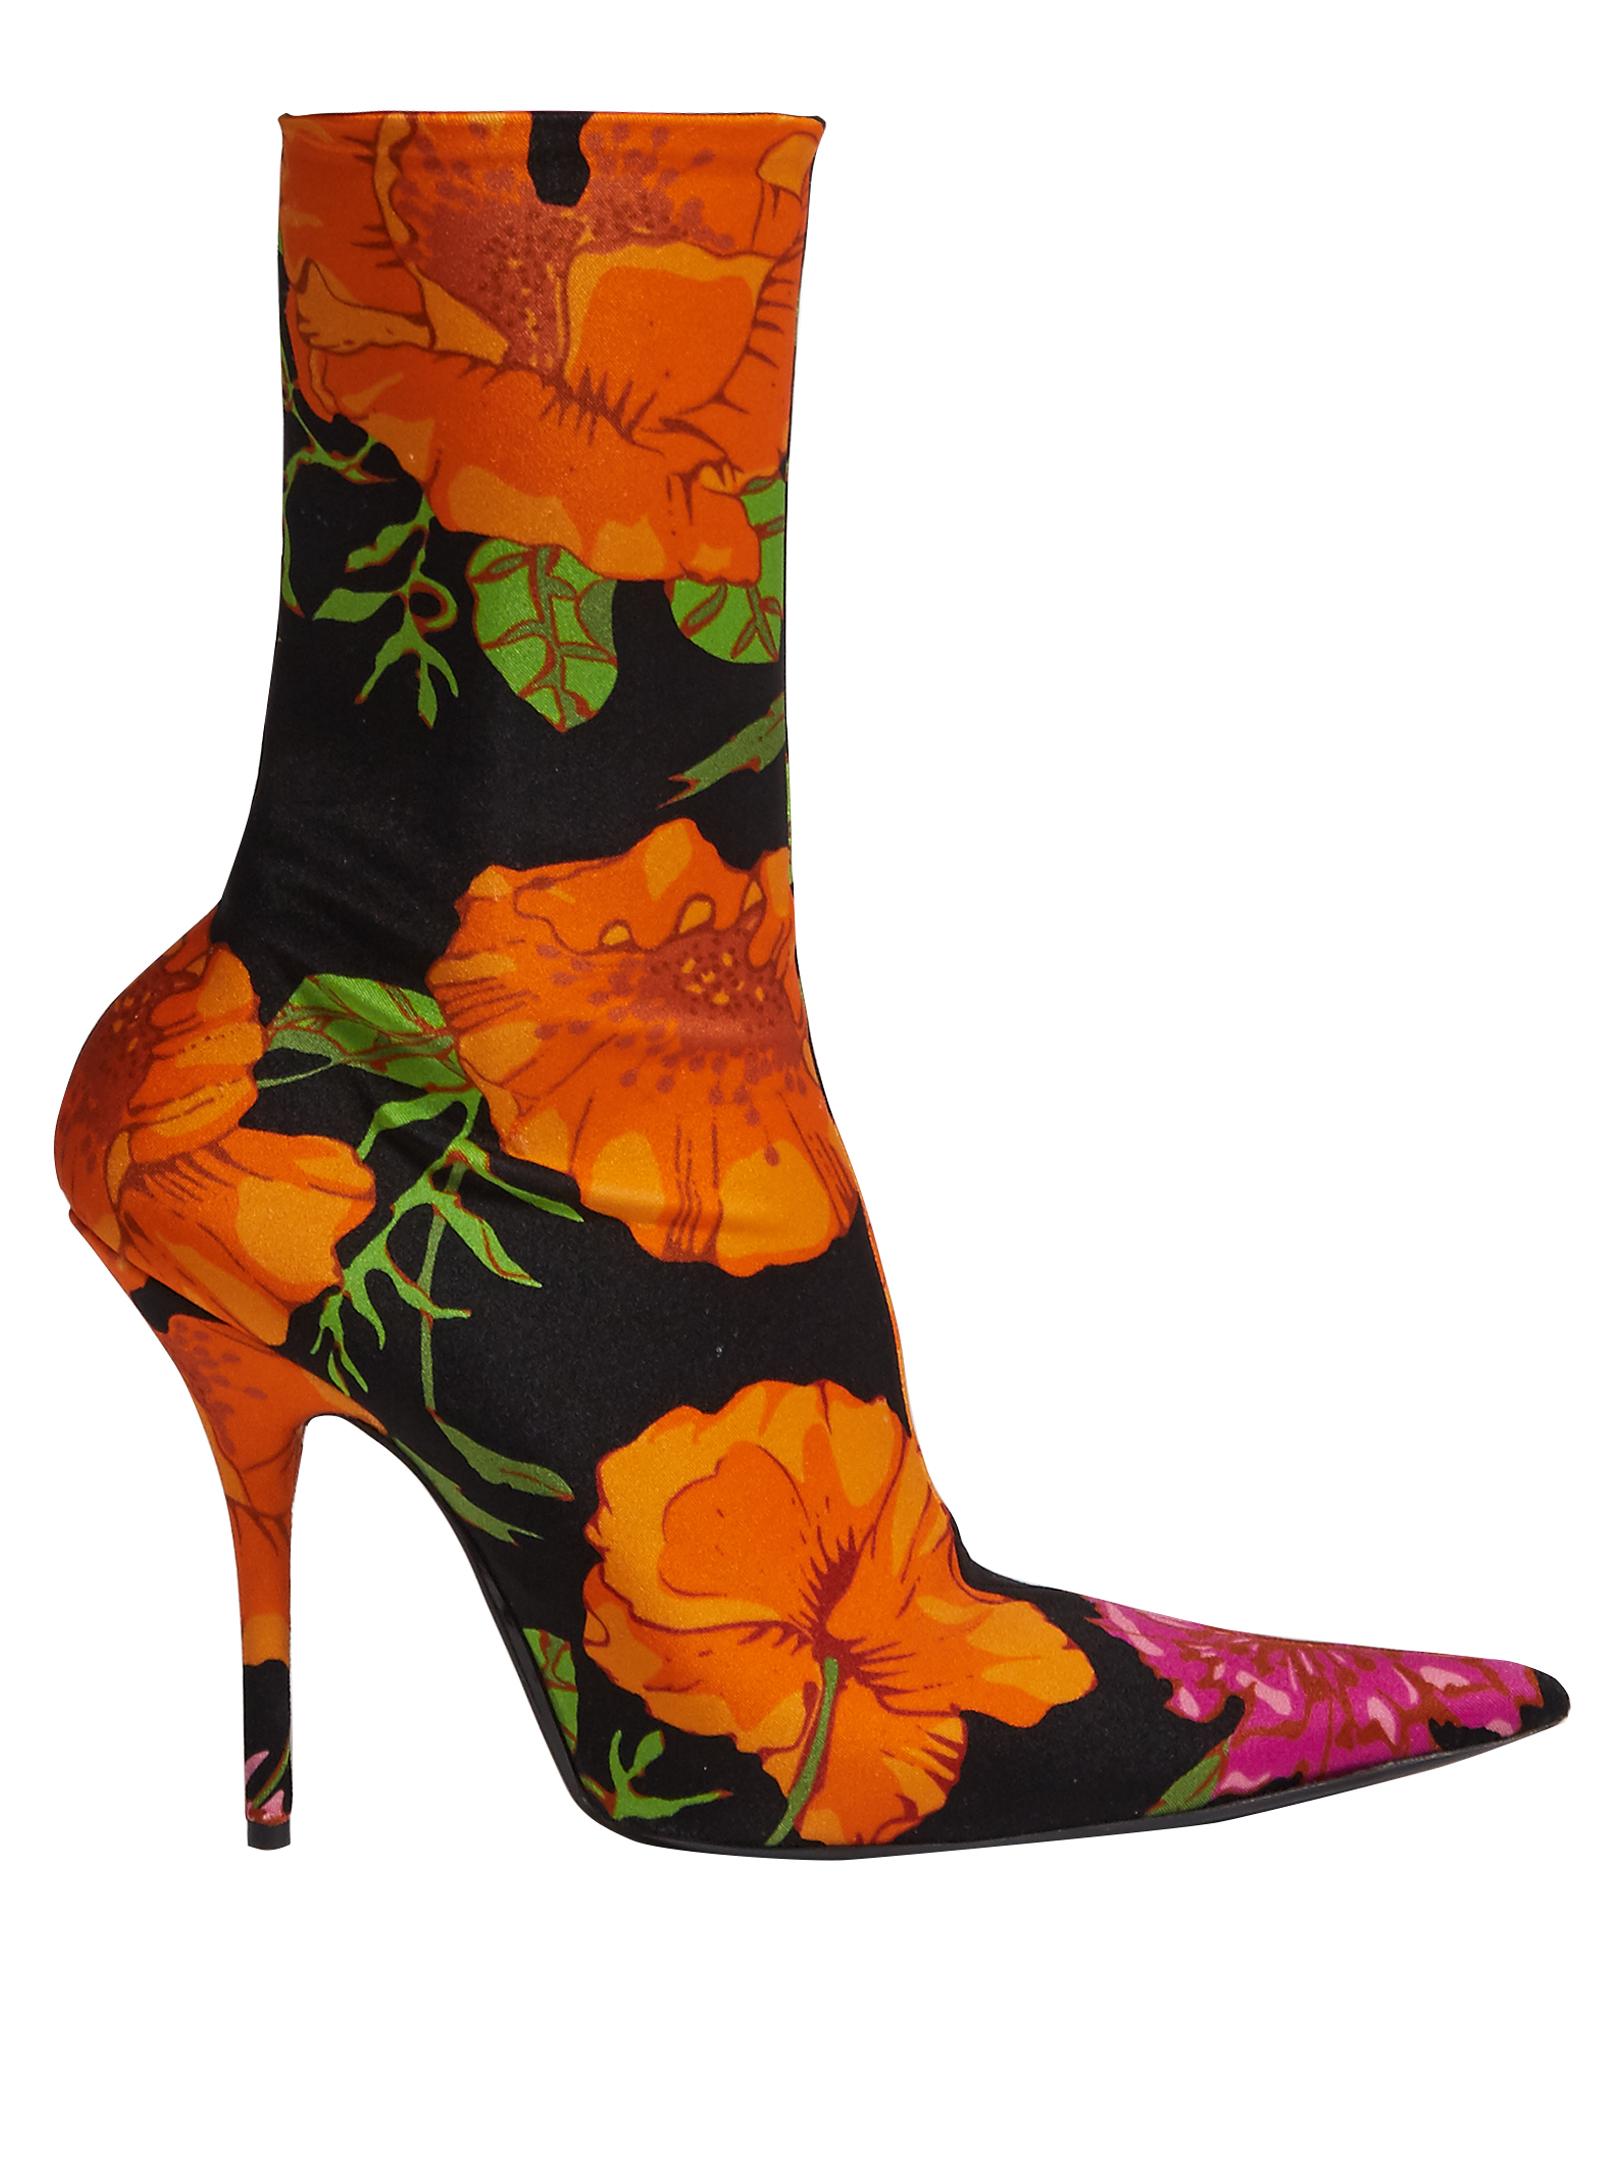 Balenciaga Knife Point-toe Floral-print Ankle Boots in Black | Lyst